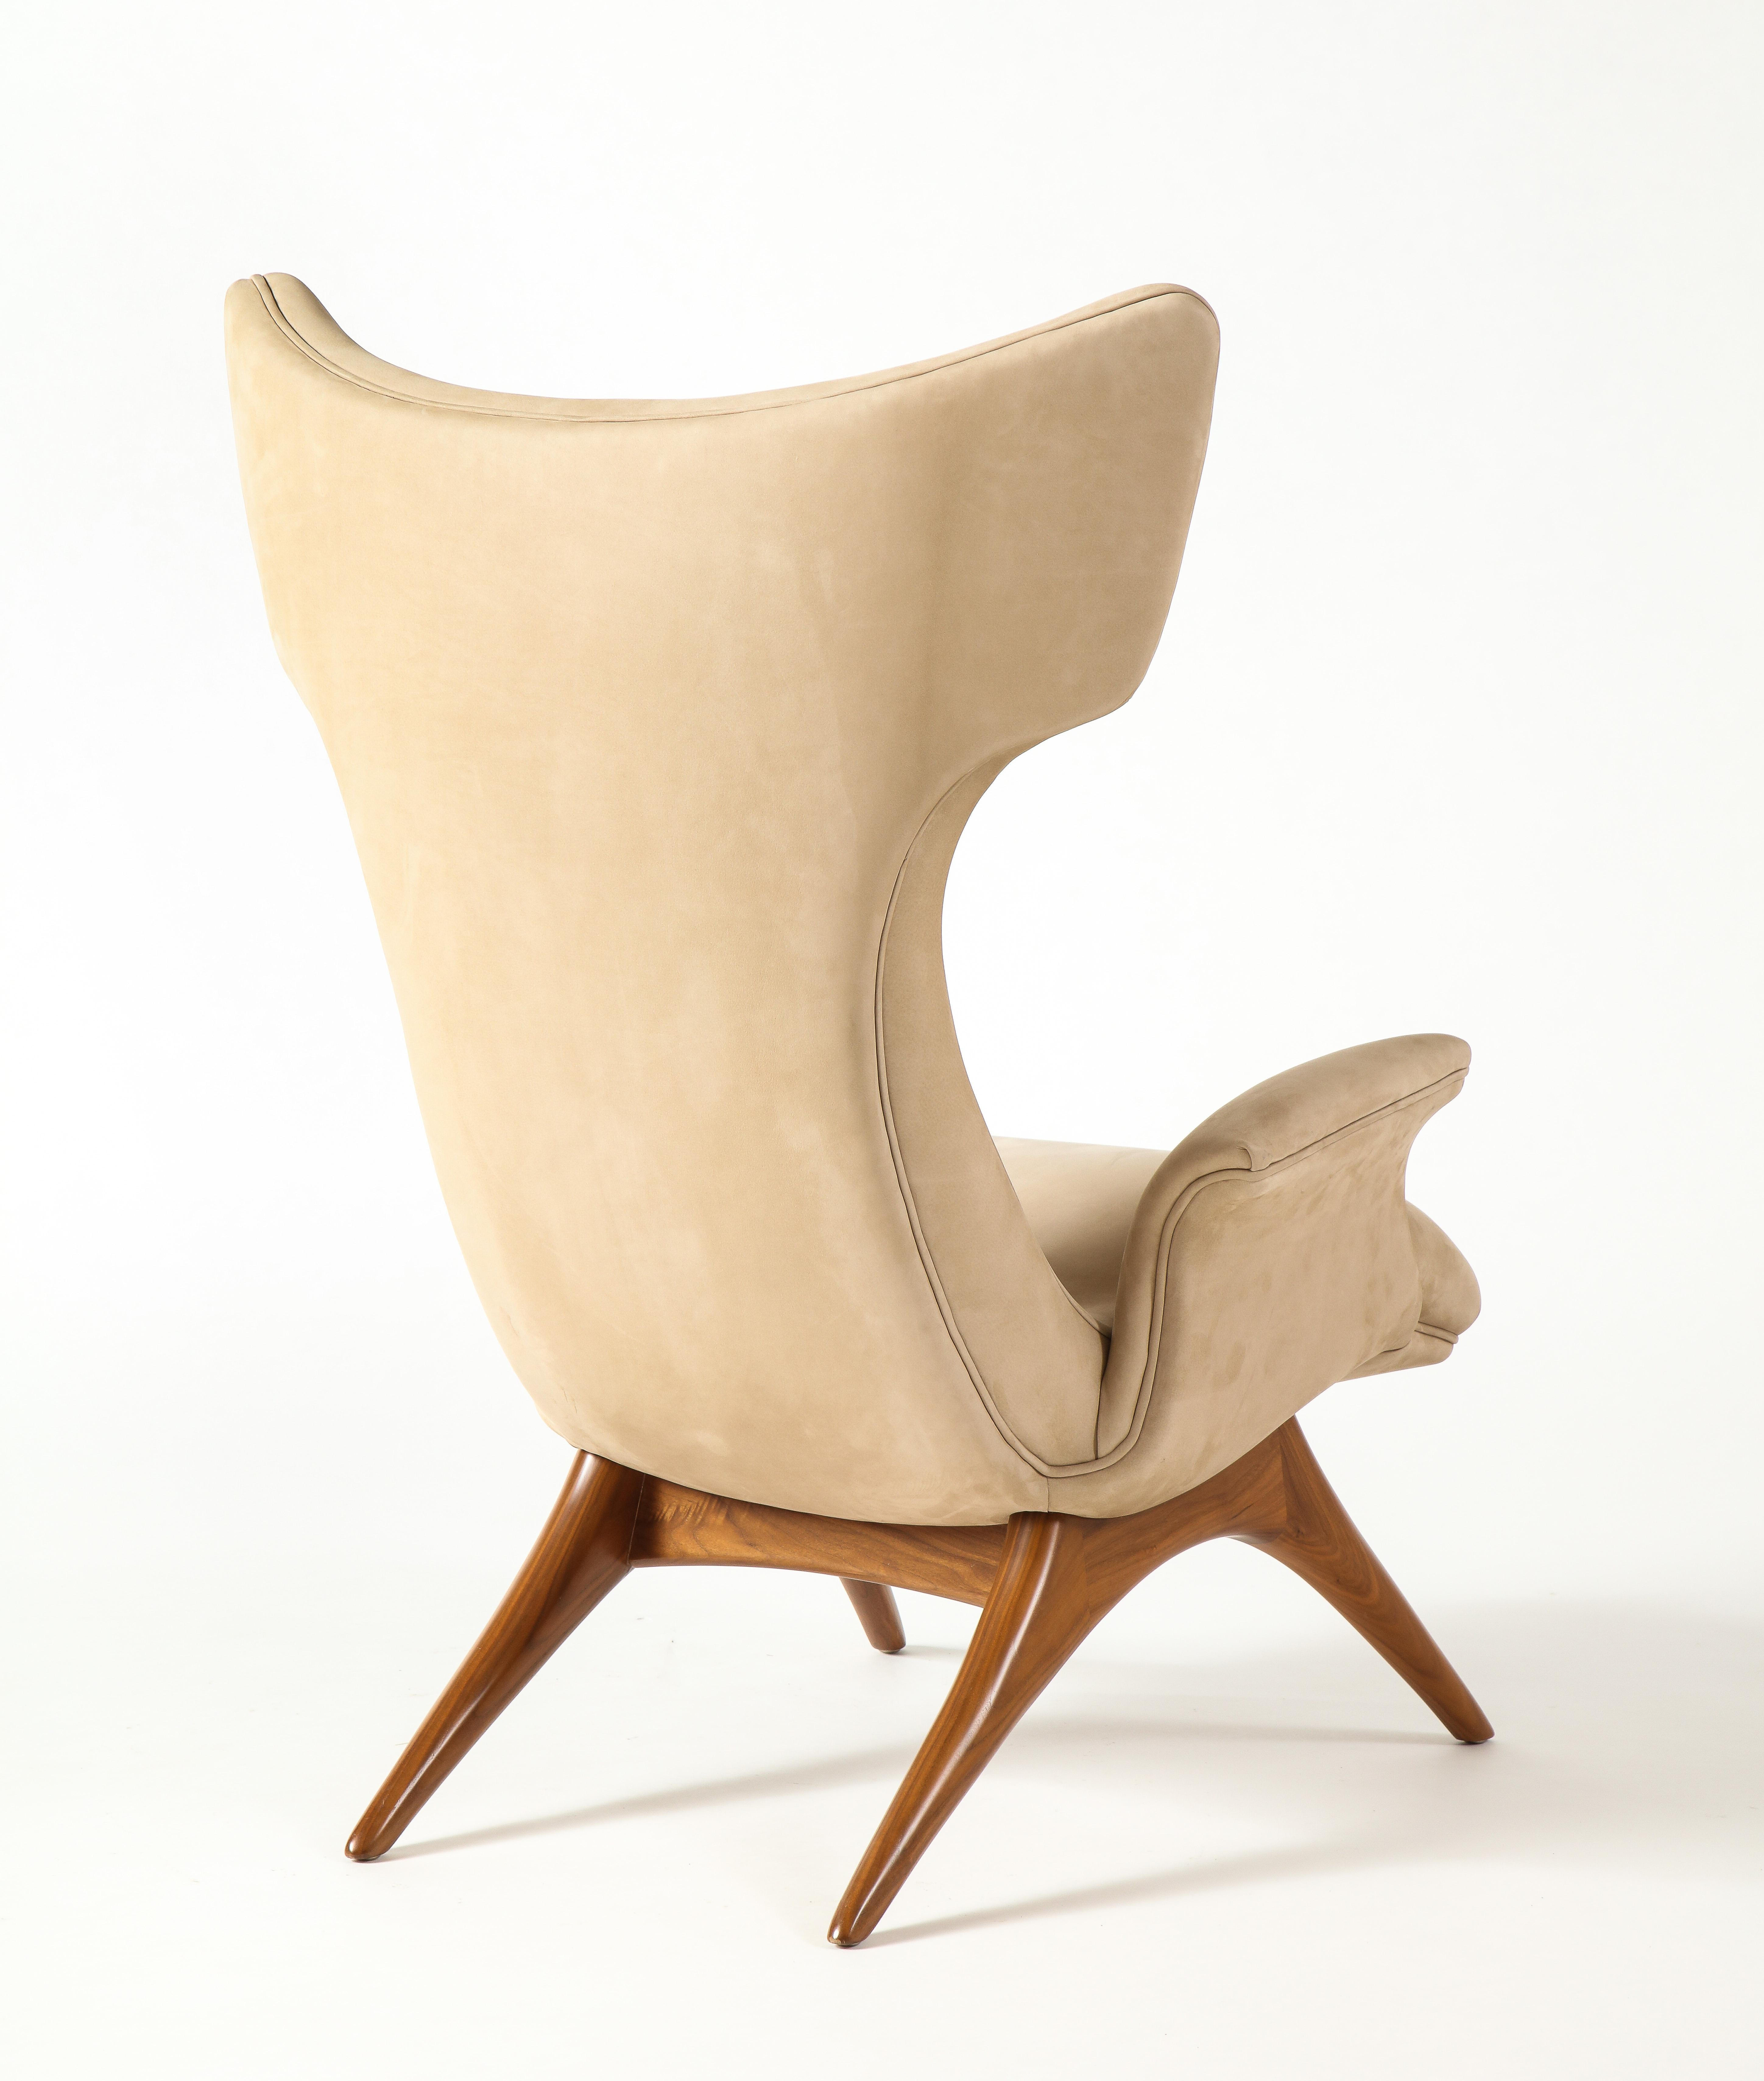 Vladimir Kagan Ondine Chair with Sueded Leather Upholstery & Natural Walnut Base 4